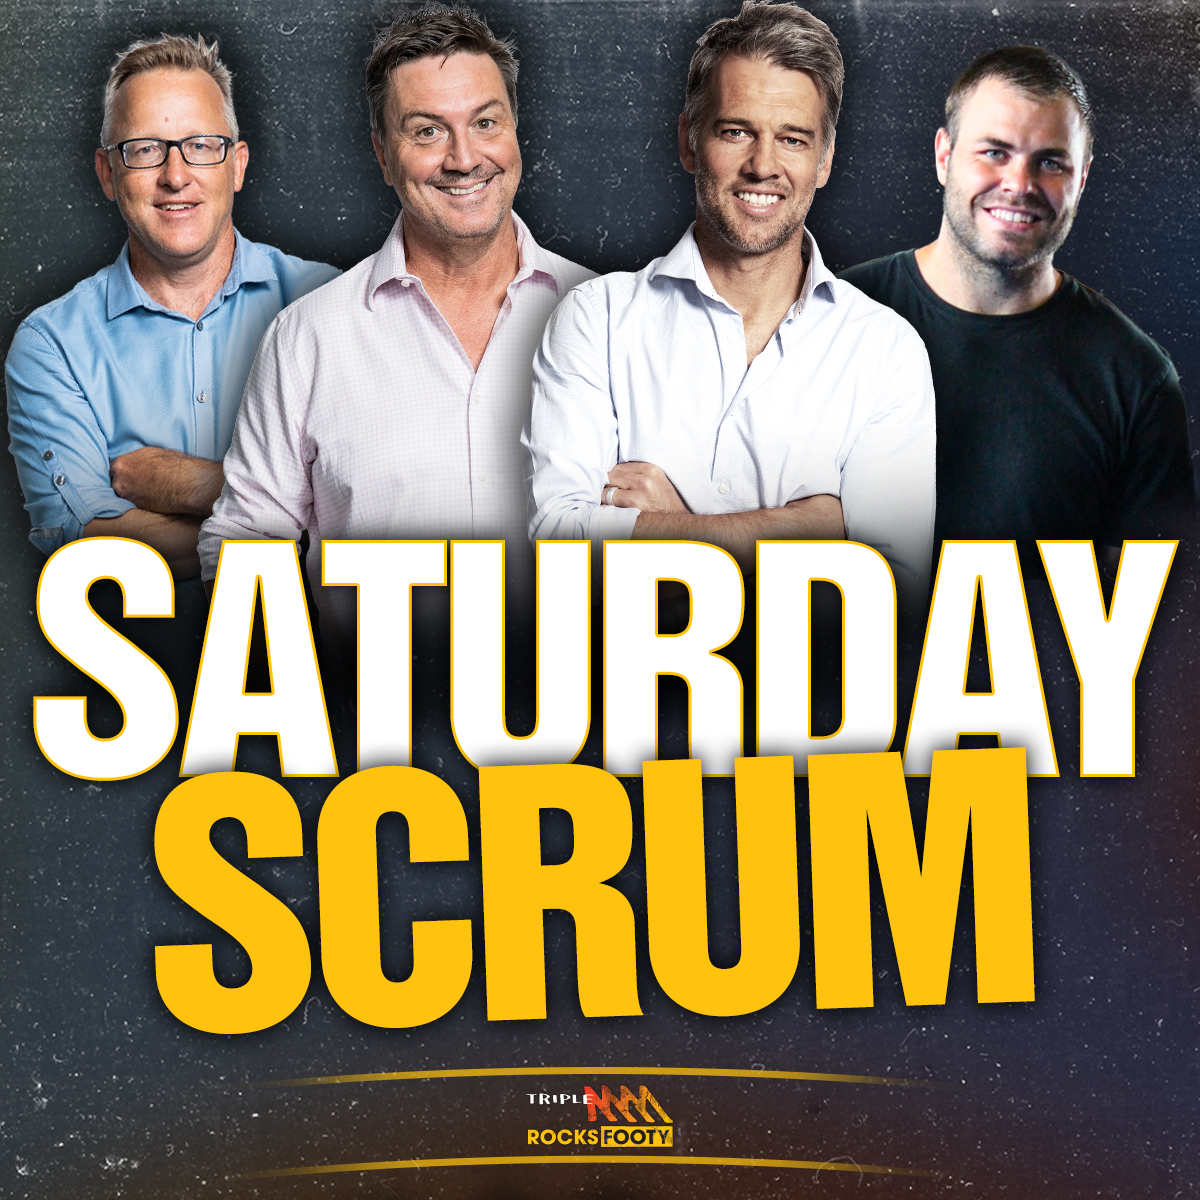 Saturday Scrum | Big News On The NSW Blues Side For Game 1, More Sin-Bin/Hip-Drop Drama Ruining Games & Who Will Be The Next Parramatta Eels Head Coach?